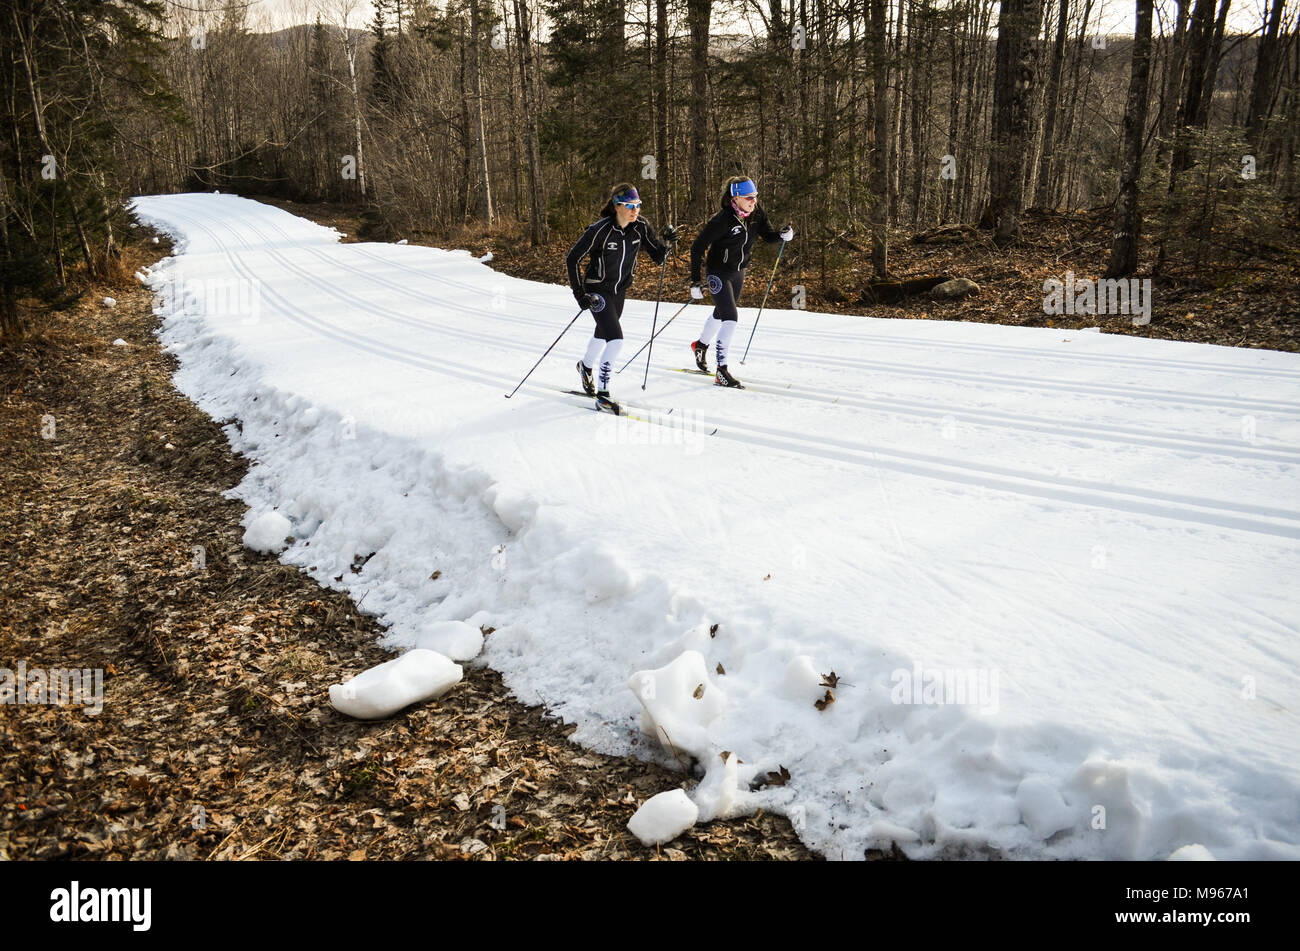 Cross-country skiers ski on a ribbon of manmade snow in northern Vermont in March at the Craftsbury Outdoor Center. There was no natural snow. Stock Photo